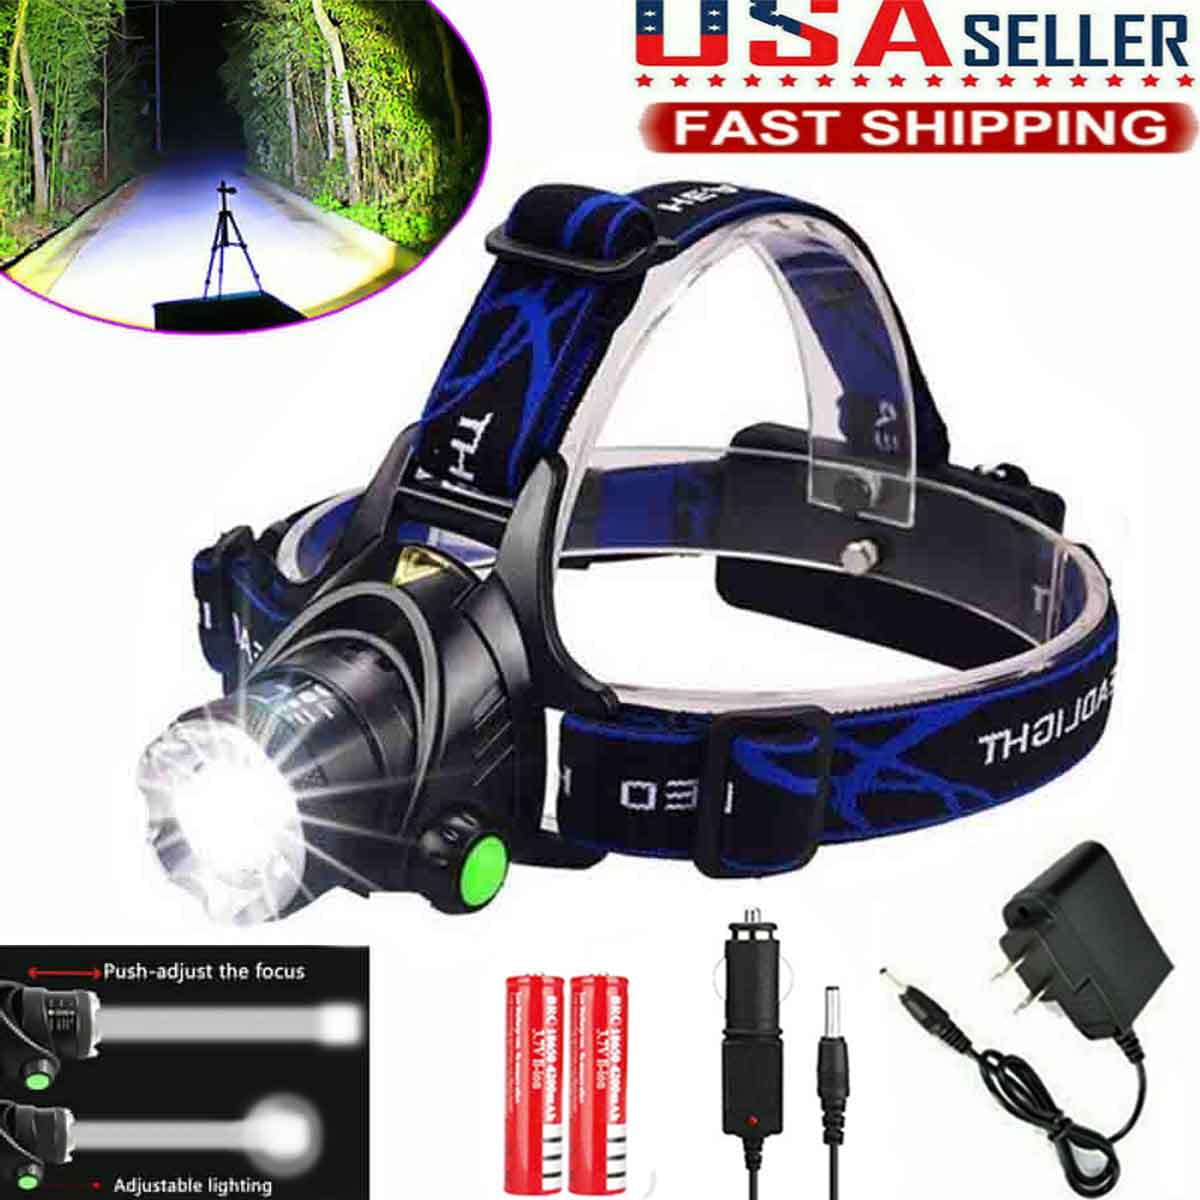 990000LM Super Bright LED Zoom Headlamp USB Rechargeable Headlight Head Torch US 